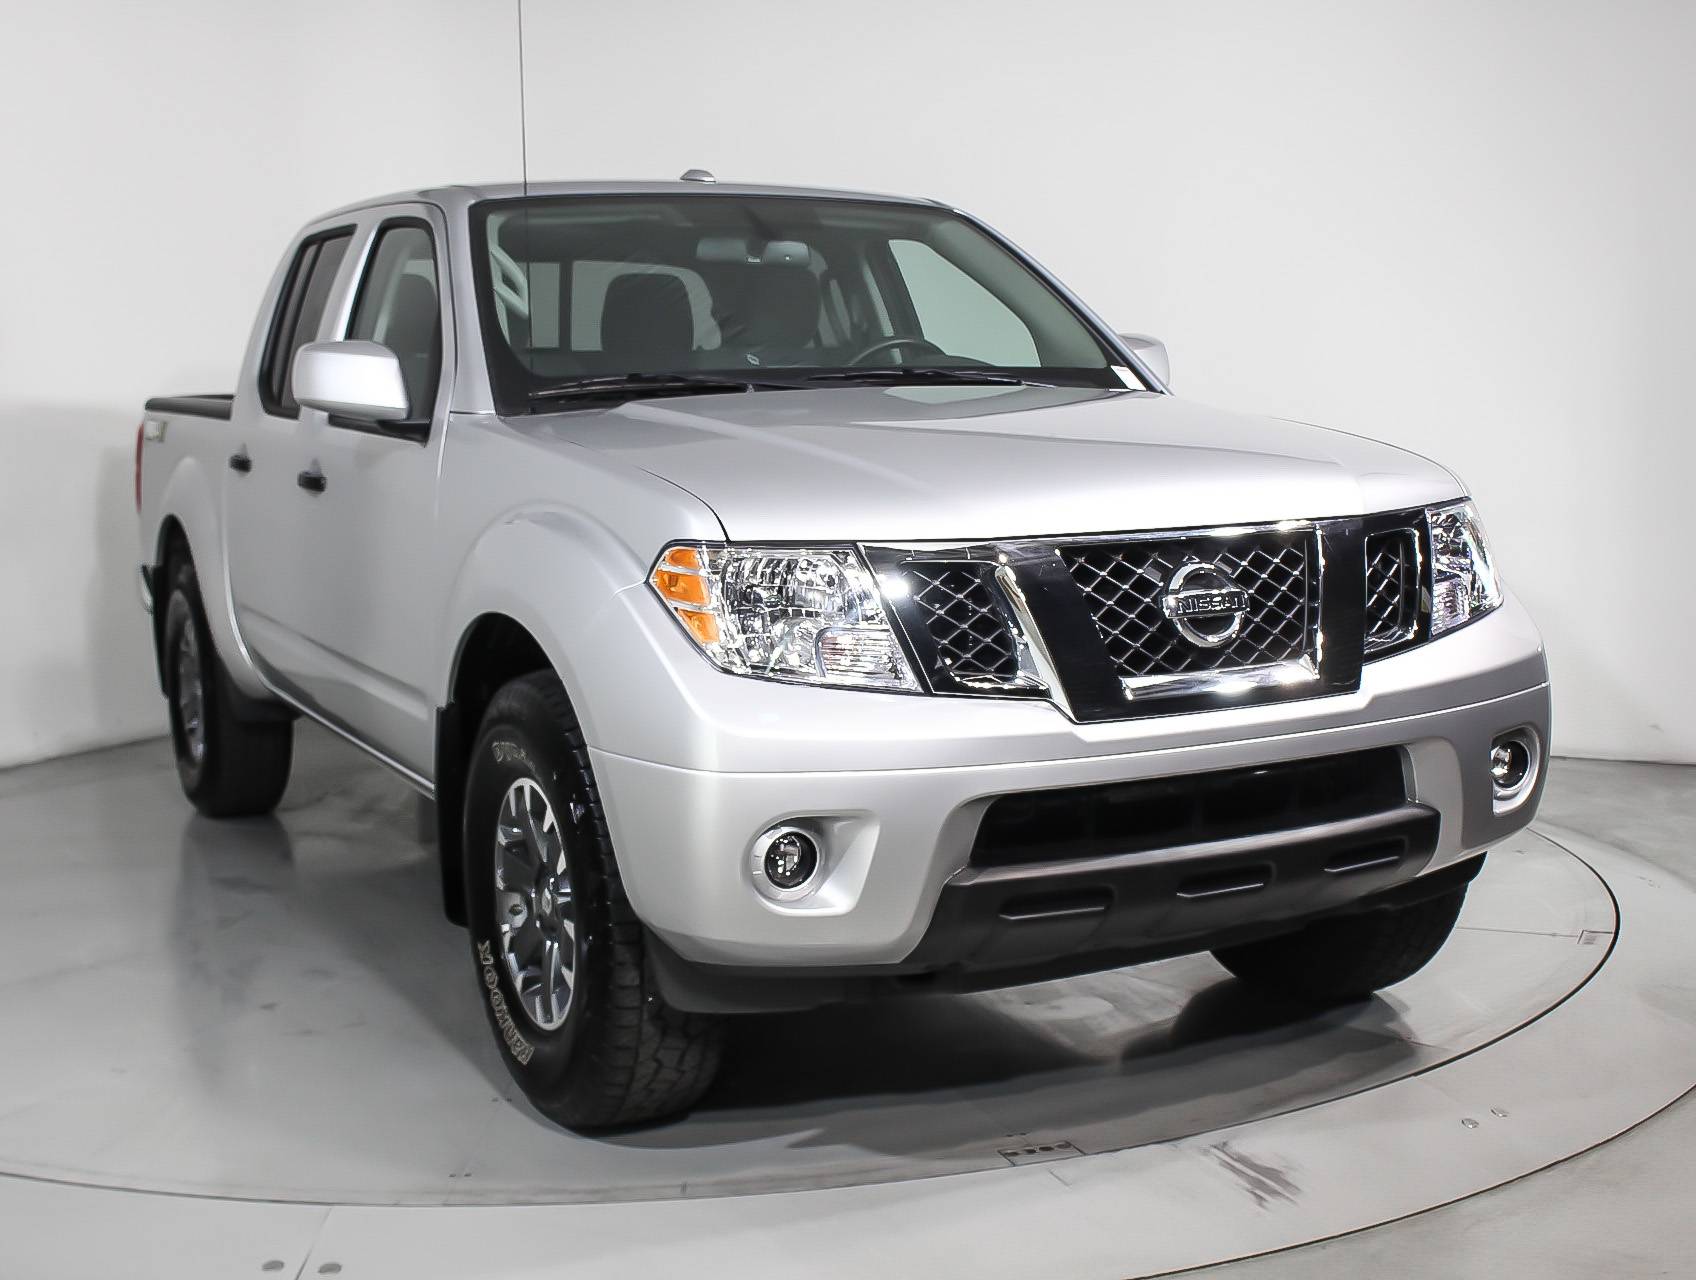 Florida Fine Cars - Used NISSAN FRONTIER 2018 MIAMI Pro-4x